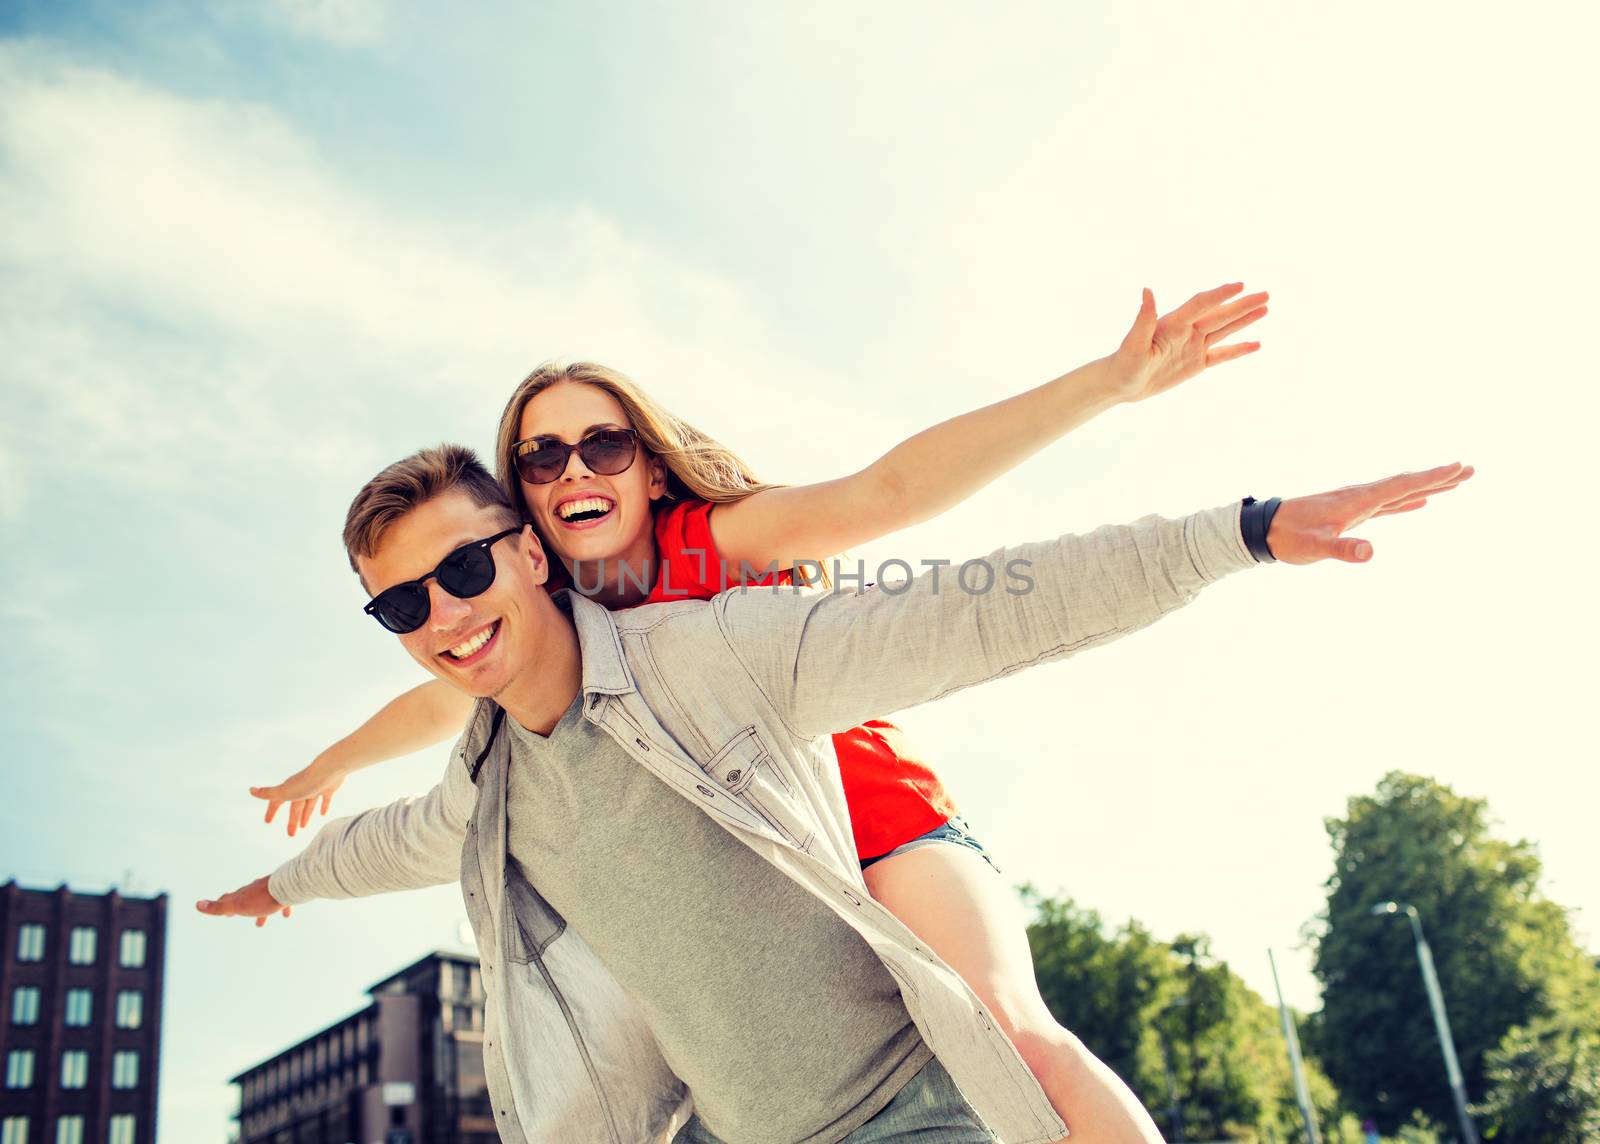 holidays, vacation, love and friendship concept - smiling couple having fun in city